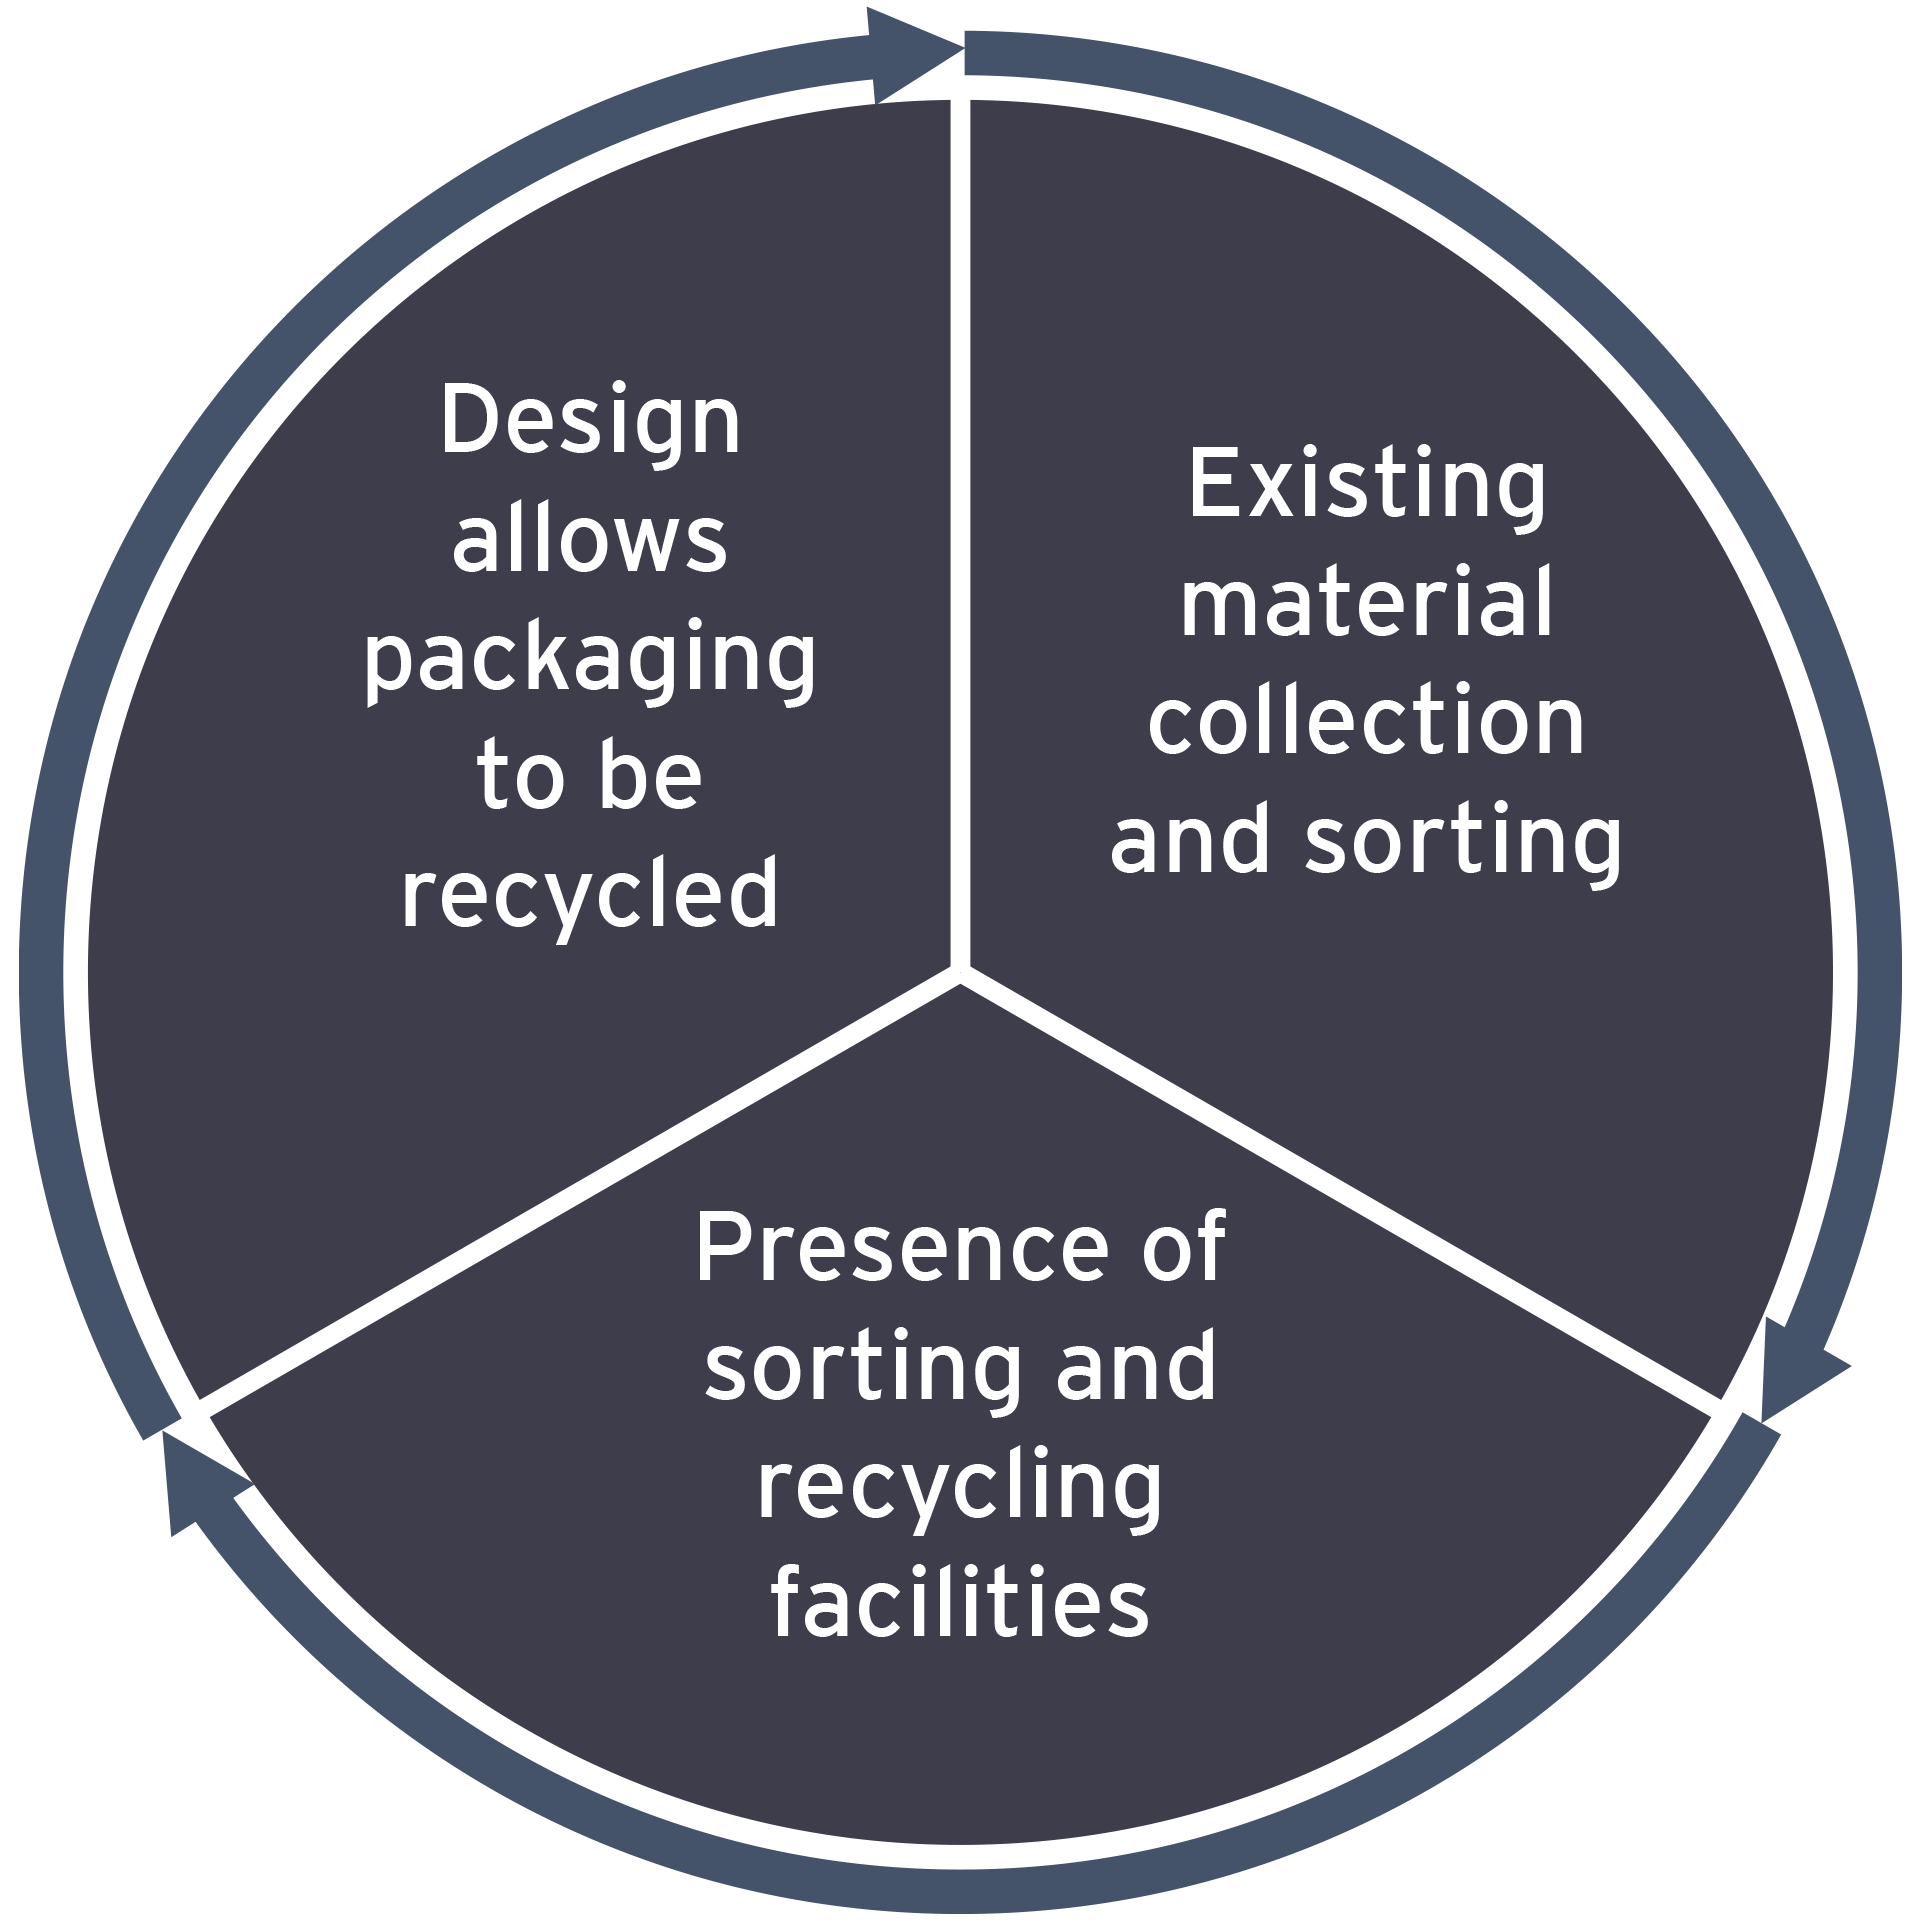 Packaging conditions: Design allows packaging to be recycled; Existing material collection and sorting; Presence of sorting and recycling facilities